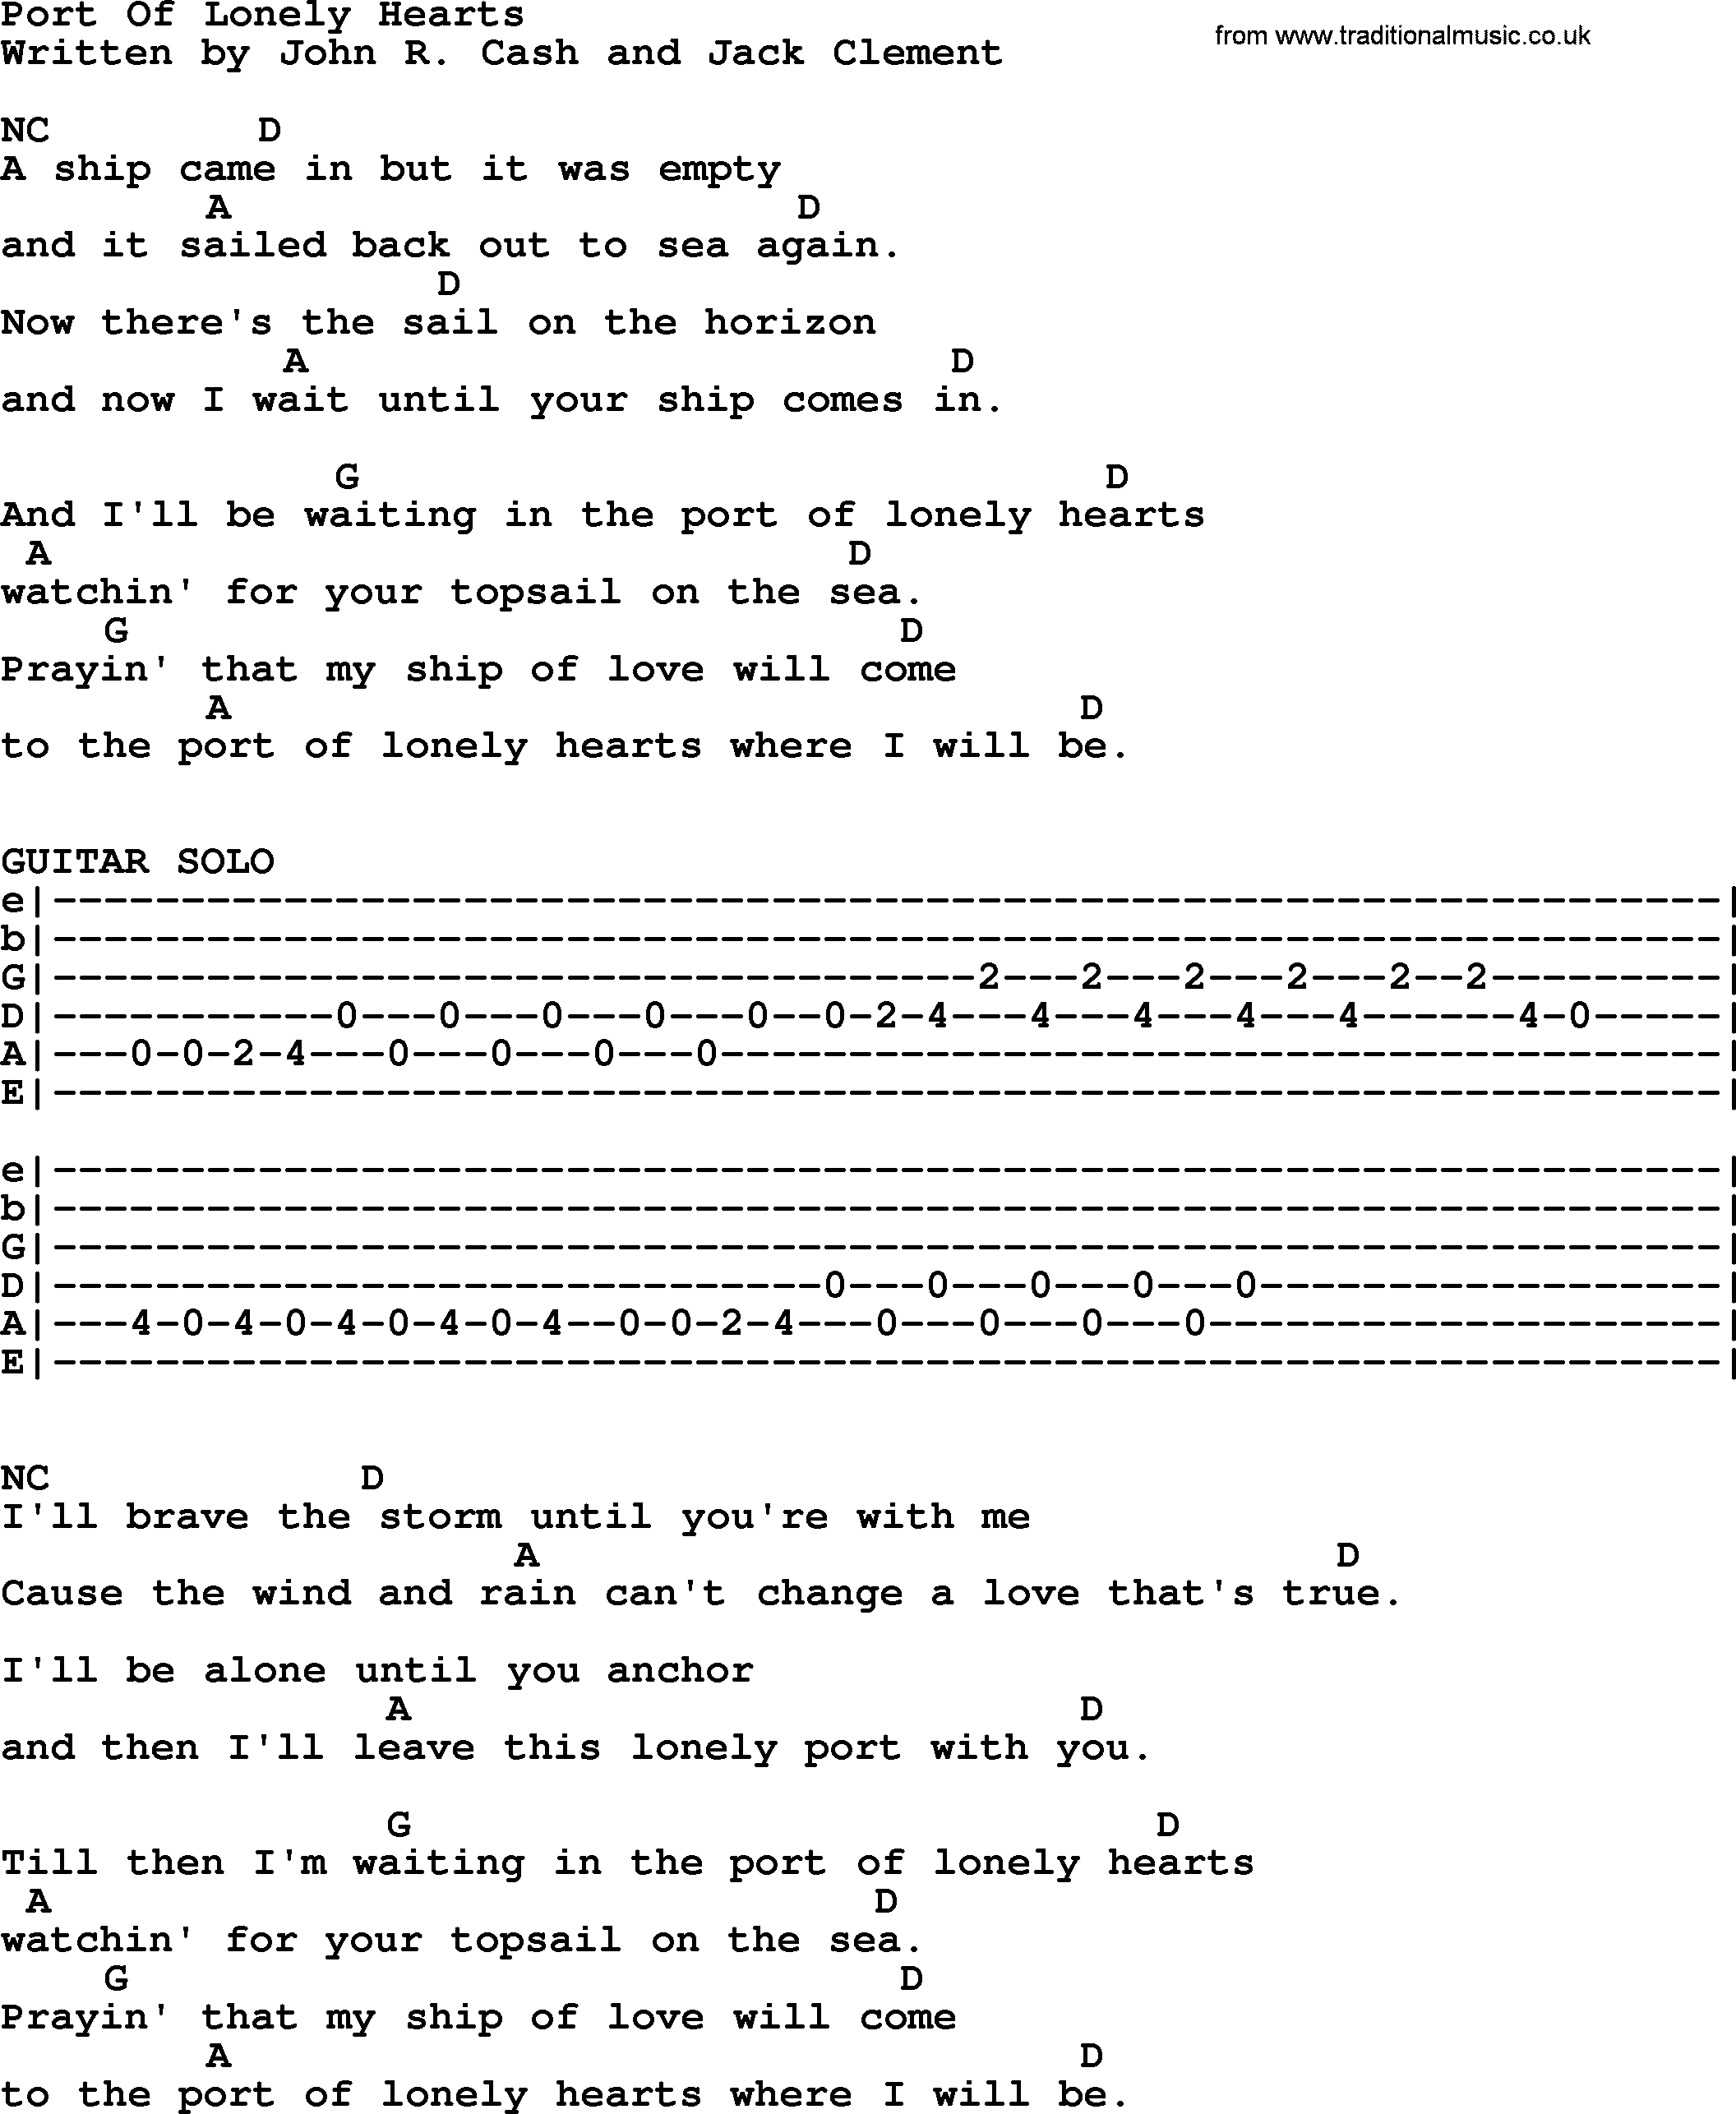 Johnny Cash song Port Of Lonely Hearts, lyrics and chords